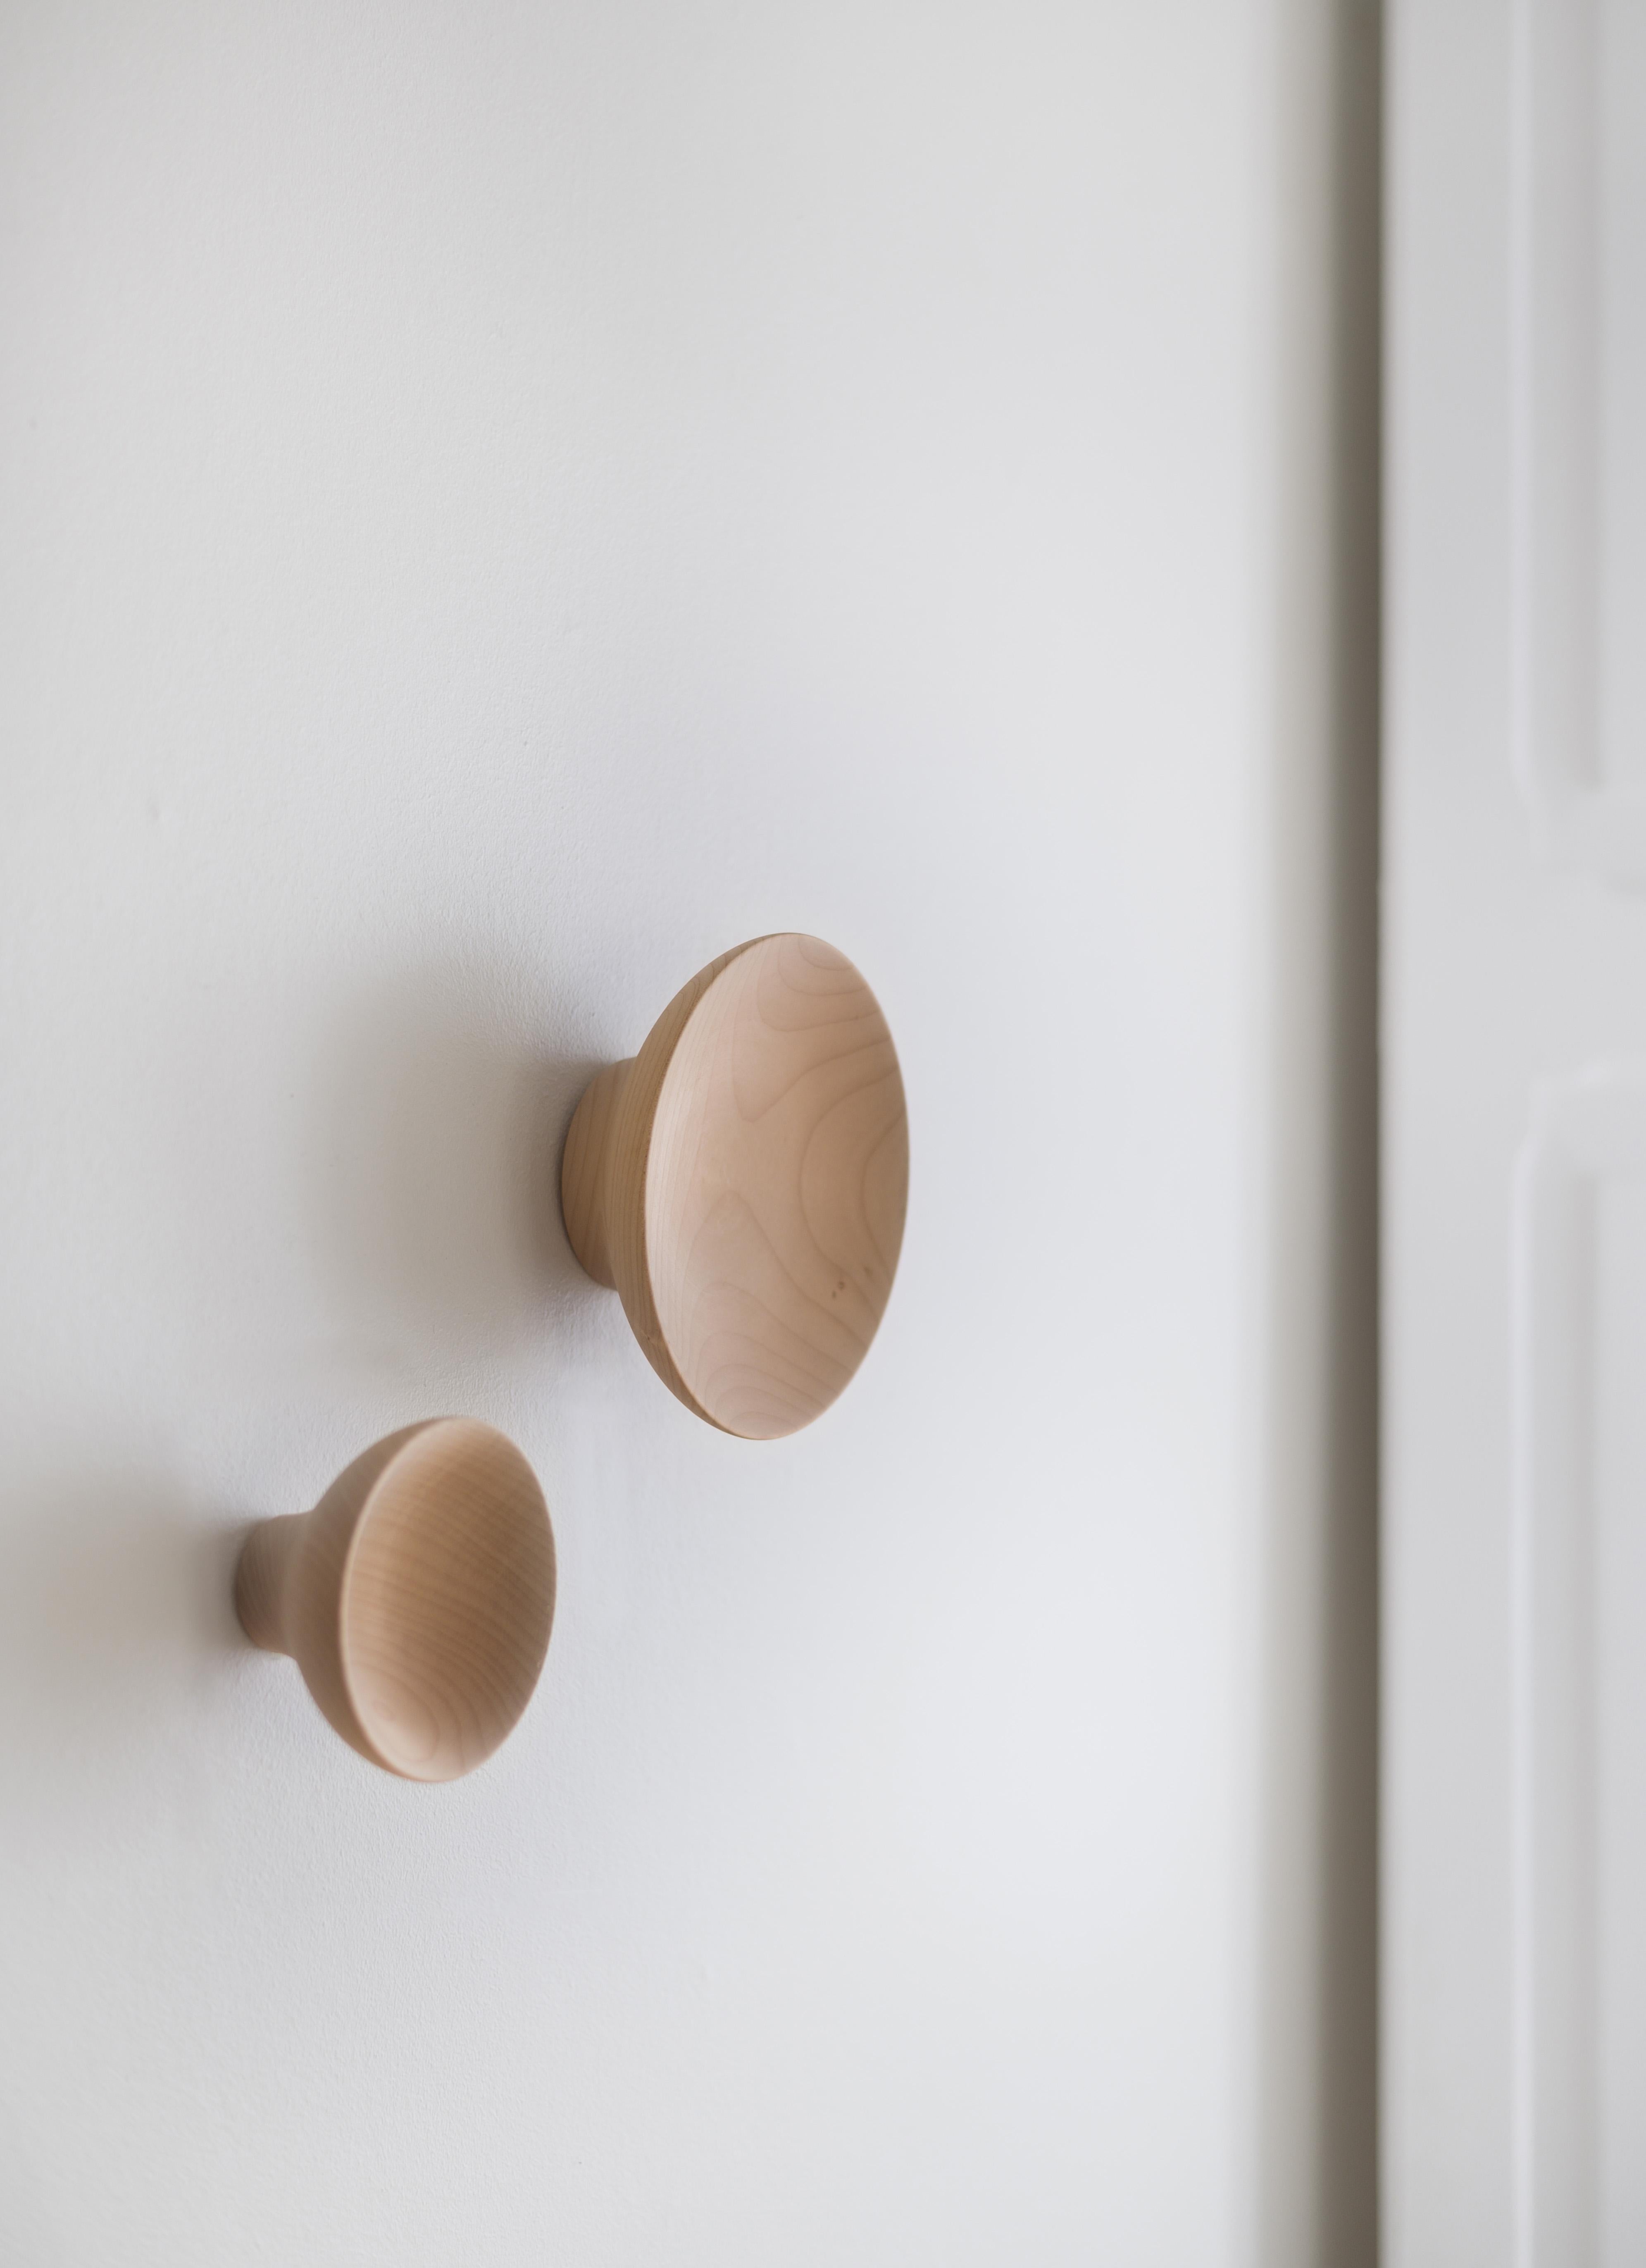 The Adão coat peg is hand turned from Portuguese chestnut wood by master wood turner Carlos Barbosa. In the true spirit of Origin, the coat peg is named after the craftsman who first made it, Adão Gomes. Designed by Pauline Deltour to be significant